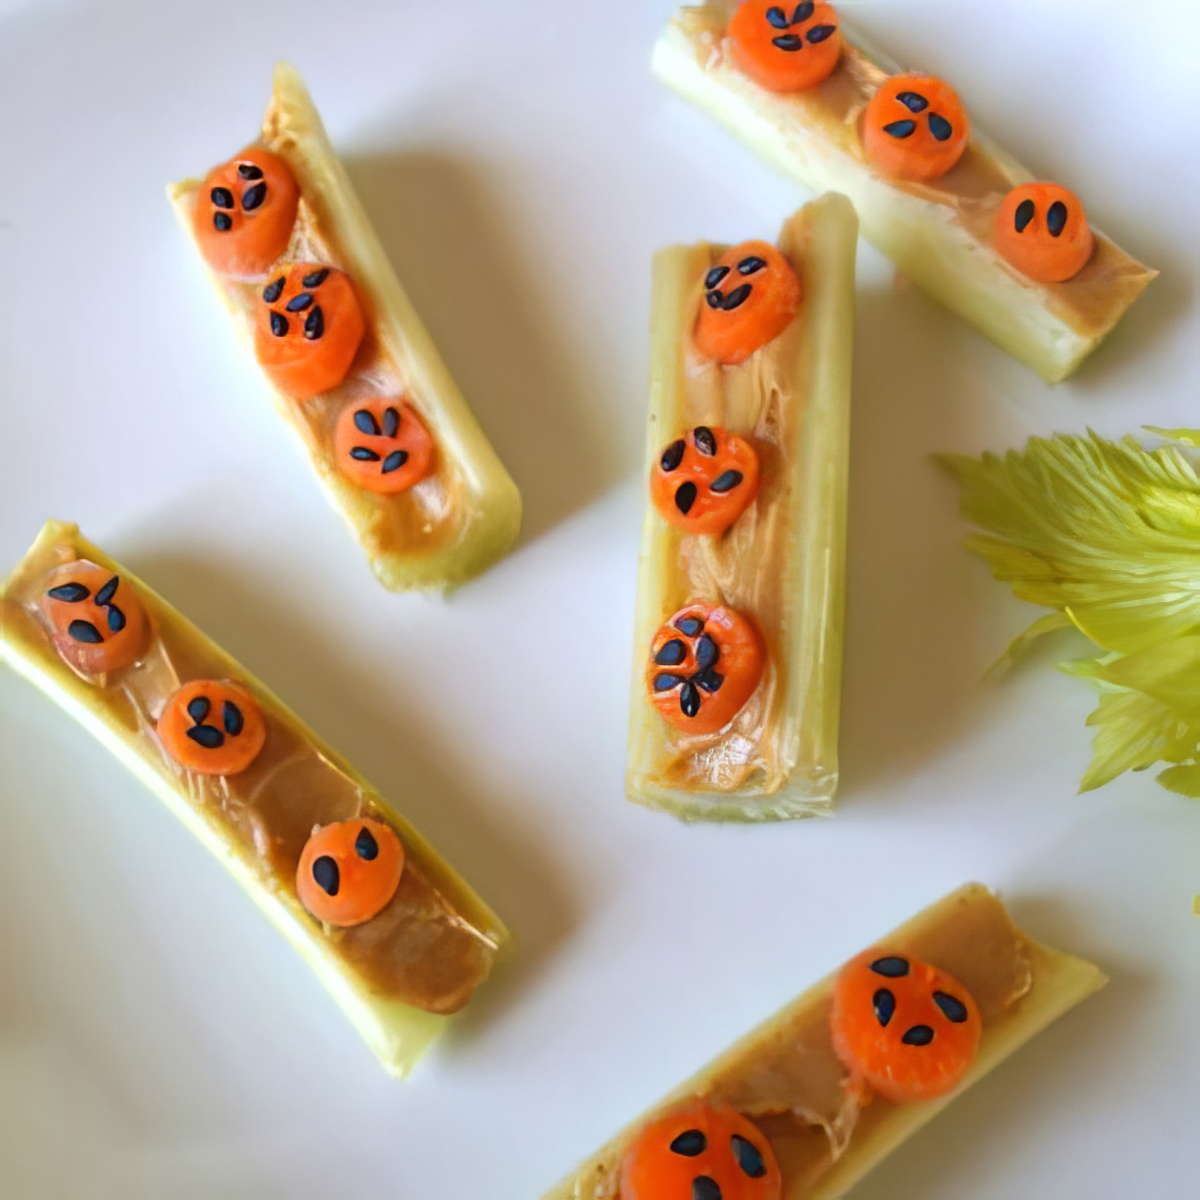 Enjoy these yummy and easy lady bug celery stick recipe with your kids!